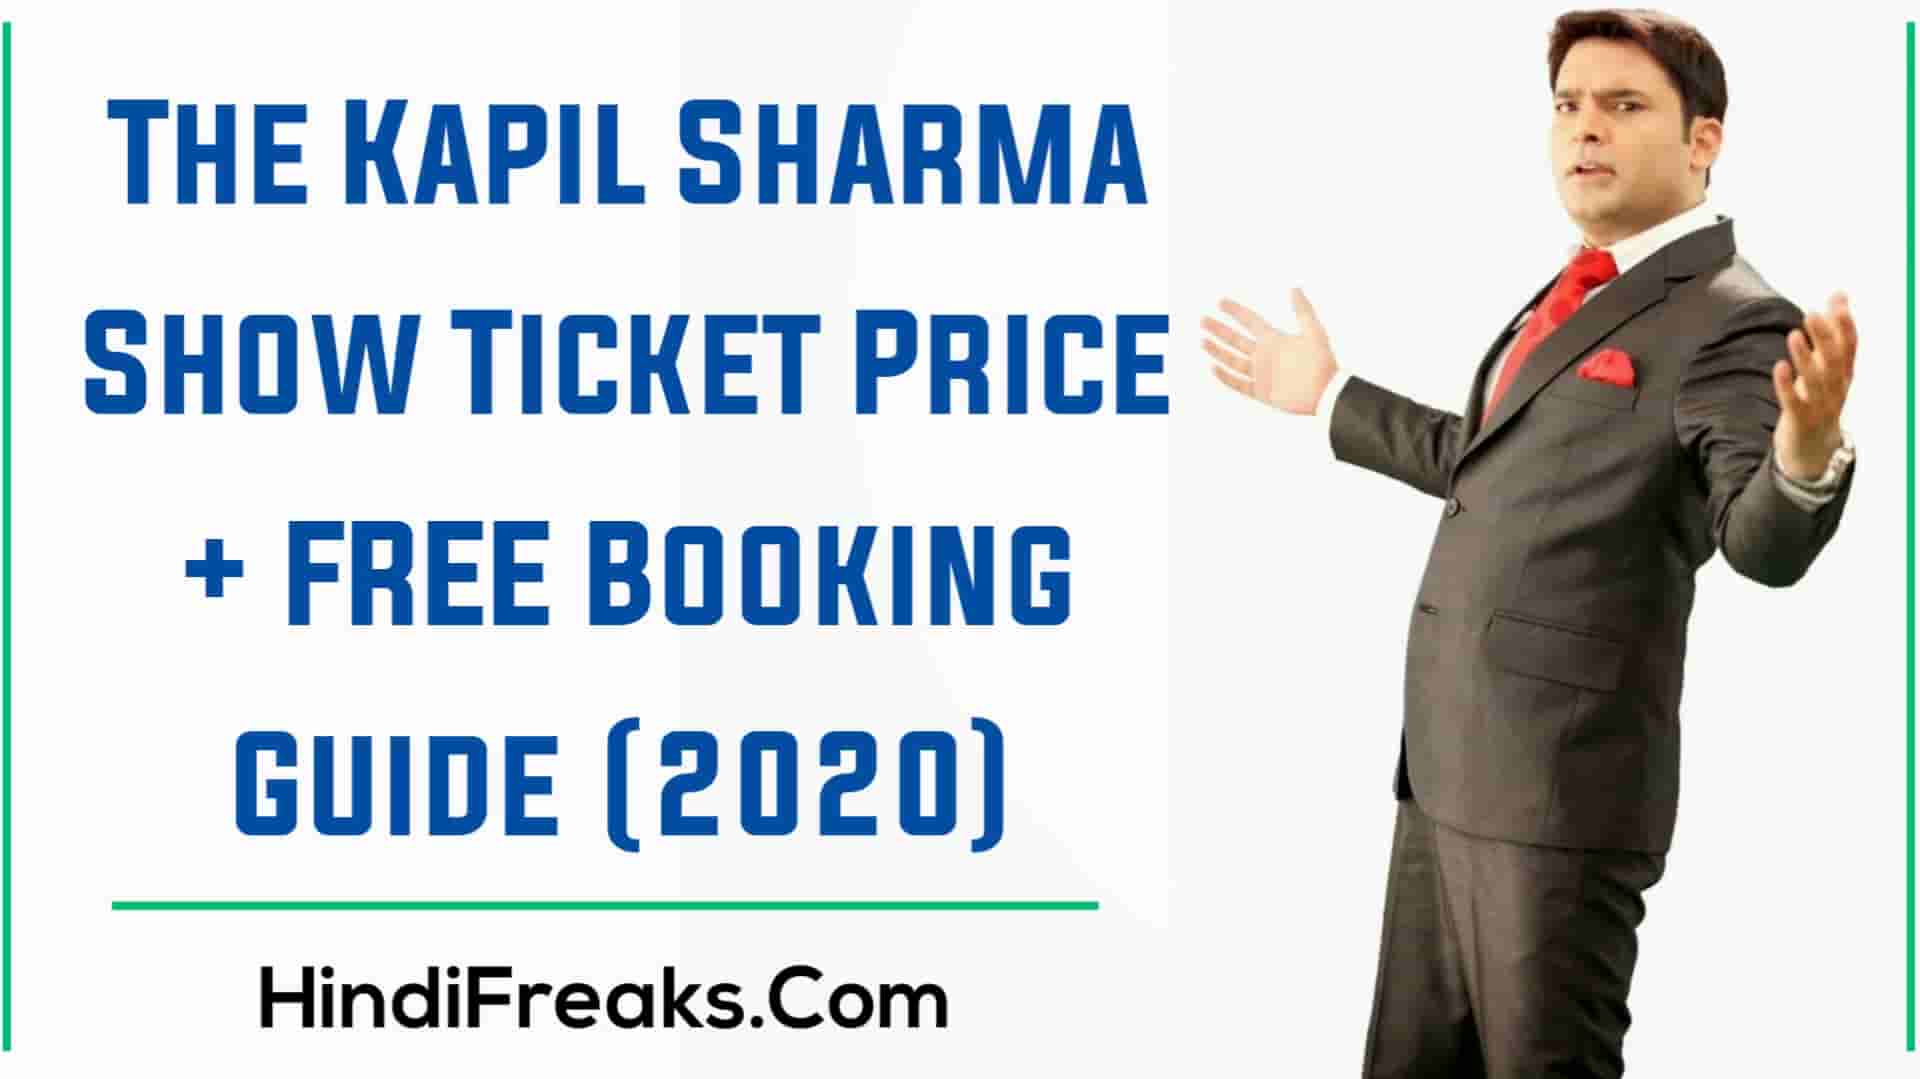 The Kapil Sharma Show Ticket Price + FREE Booking Guide (2023)